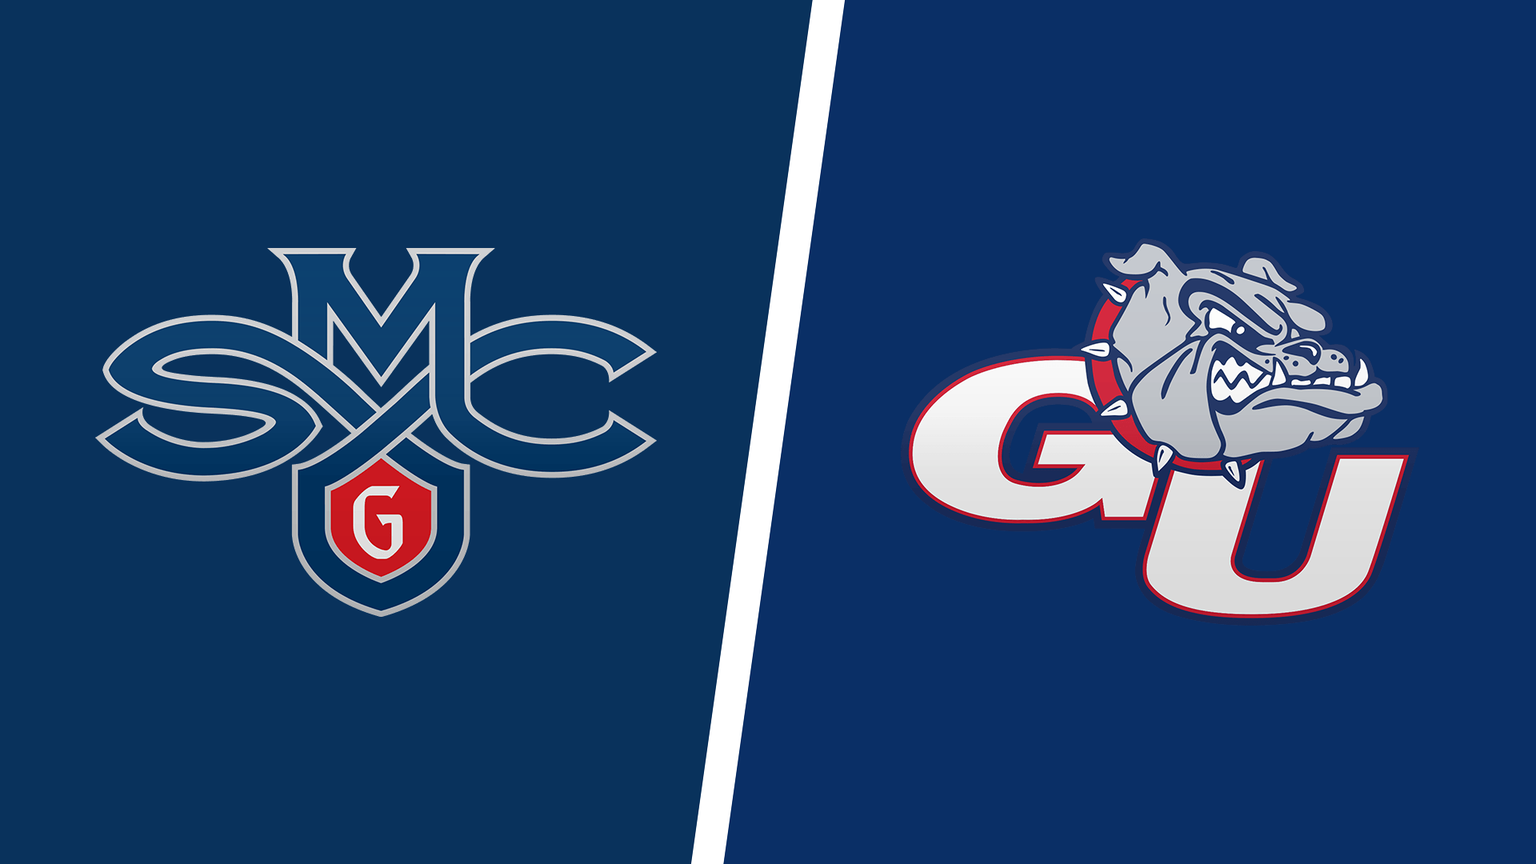 How to Watch Gonzaga vs. Saint Mary's Game Live Online on March 8, 2022